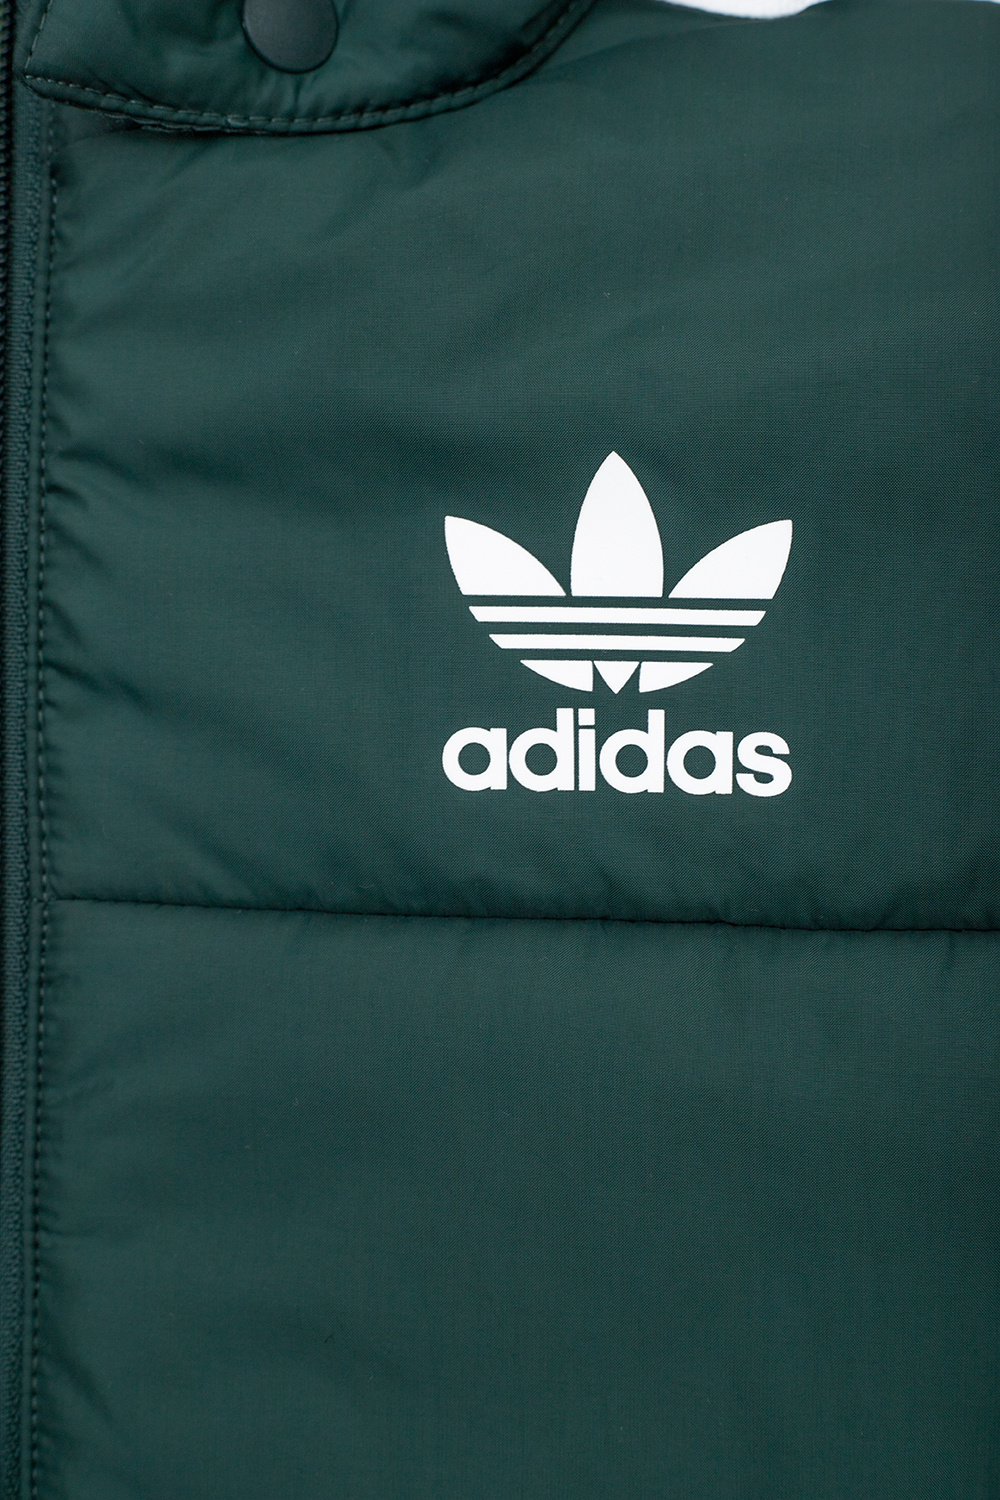 ADIDAS Kids Undeniably among the best adidas has to offer